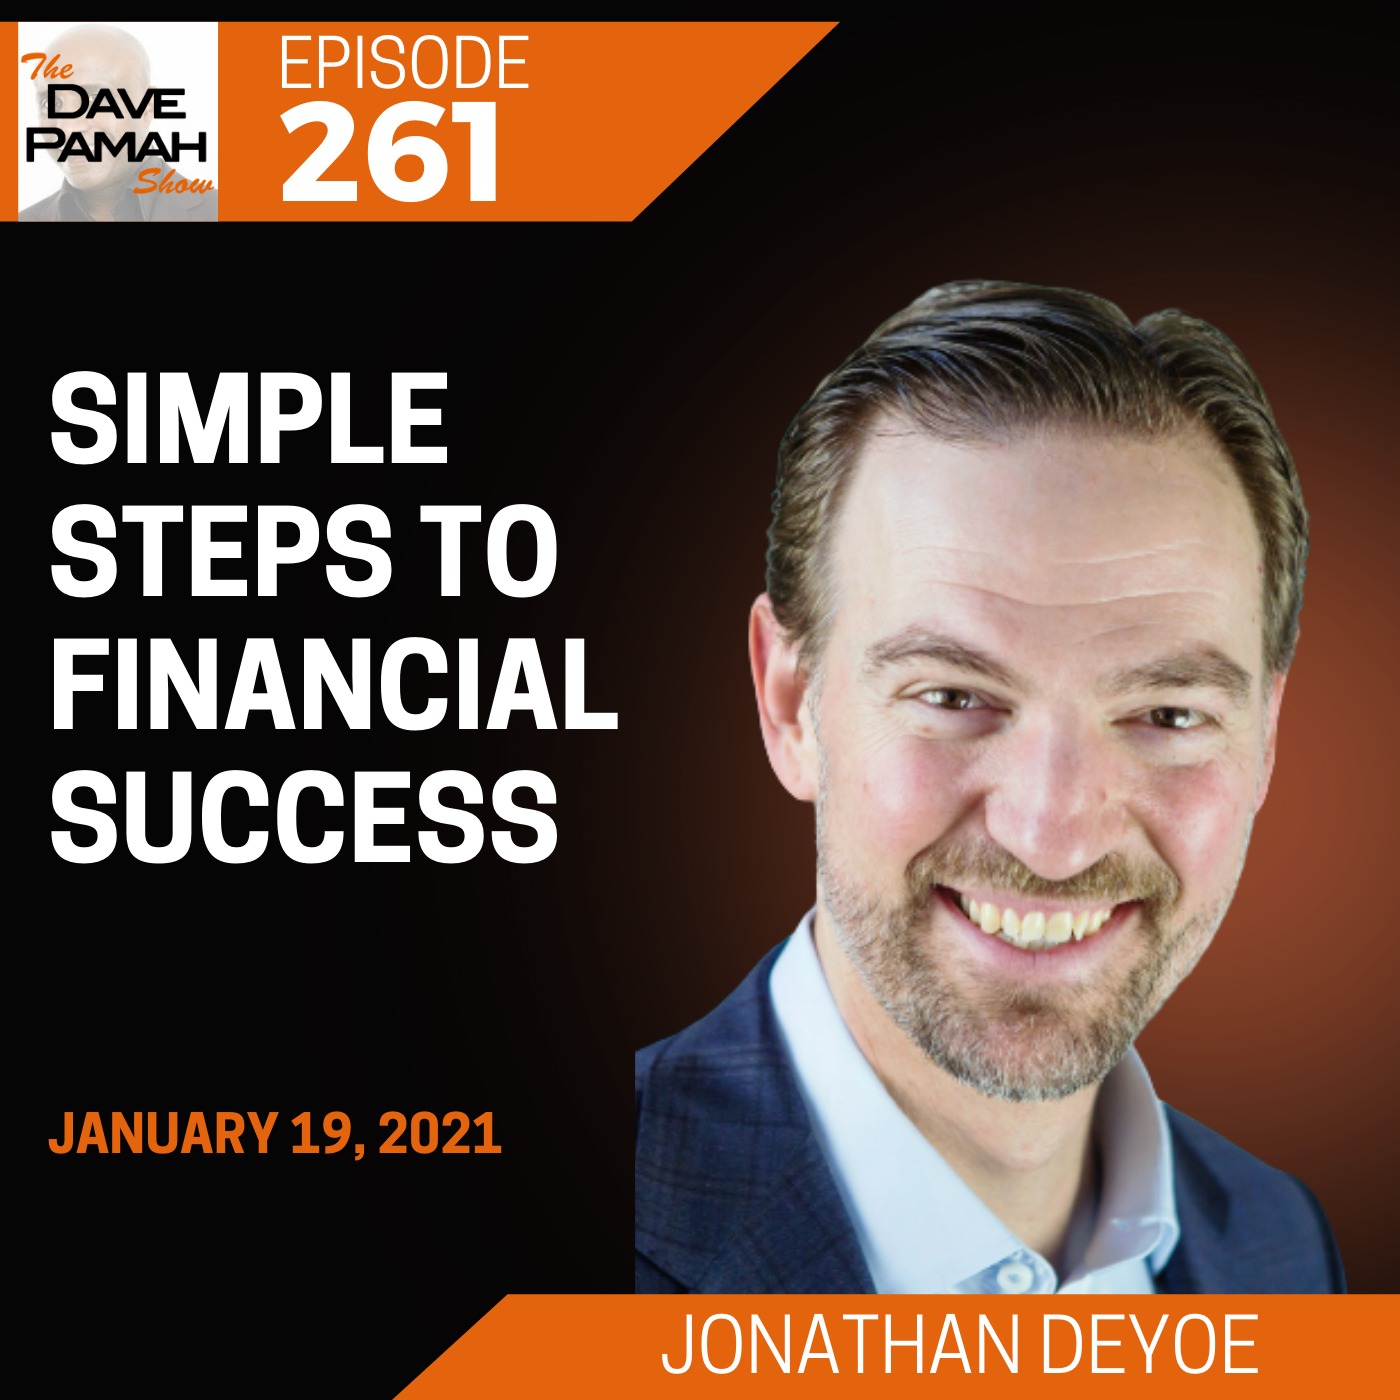 Simple steps to financial success with Jonathan DeYoe